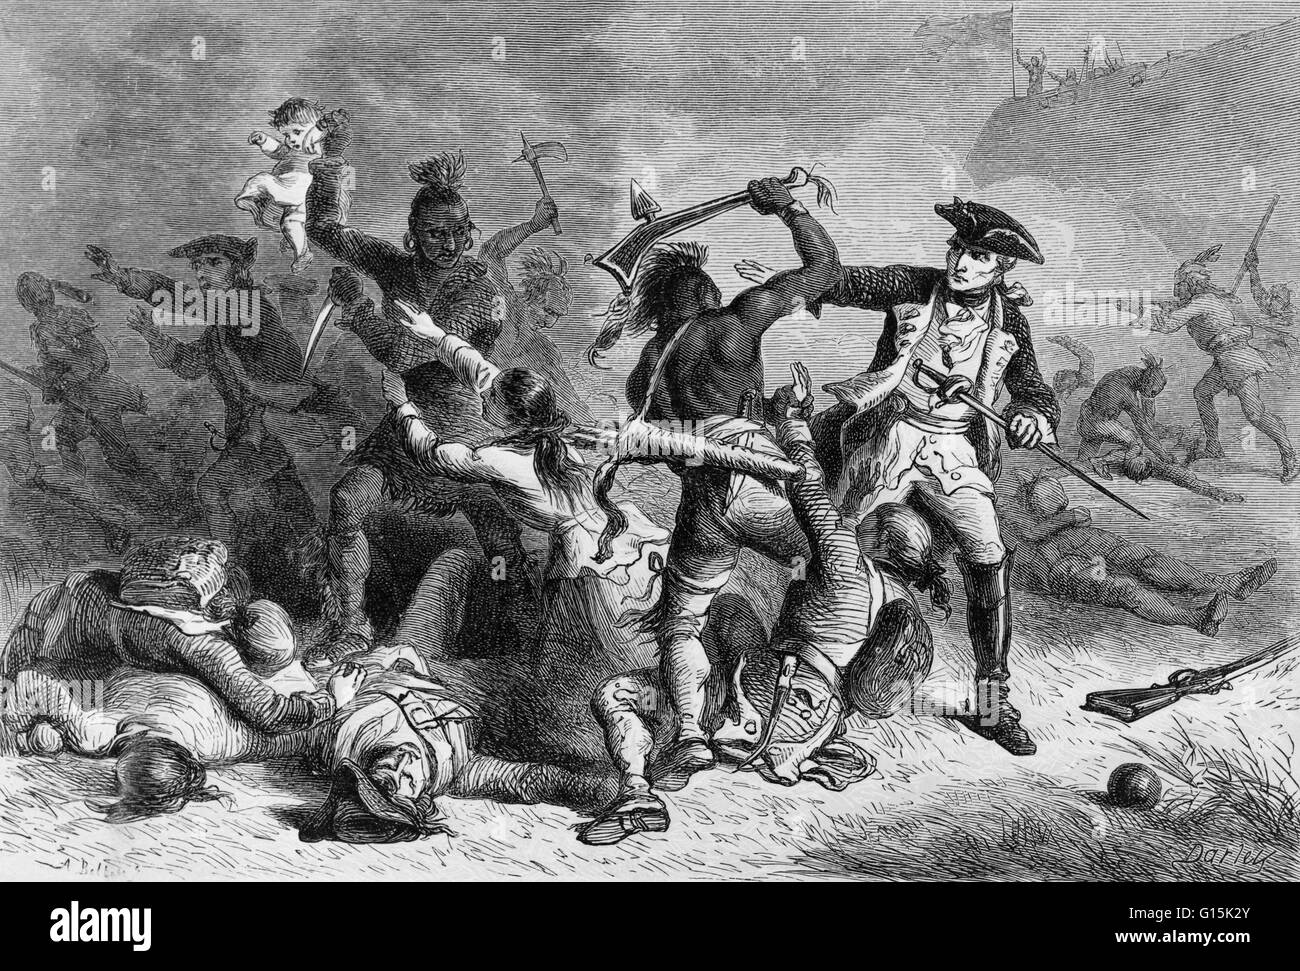 Print depicting the Battle of Fort William Henry, entitled: 'Montcalm trying to stop the massacre.' Montcalm's victory at Fort William Henry in 1757 was a military and personal victory, but the conduct of his Algonquin allies, who massacred British soldie Stock Photo